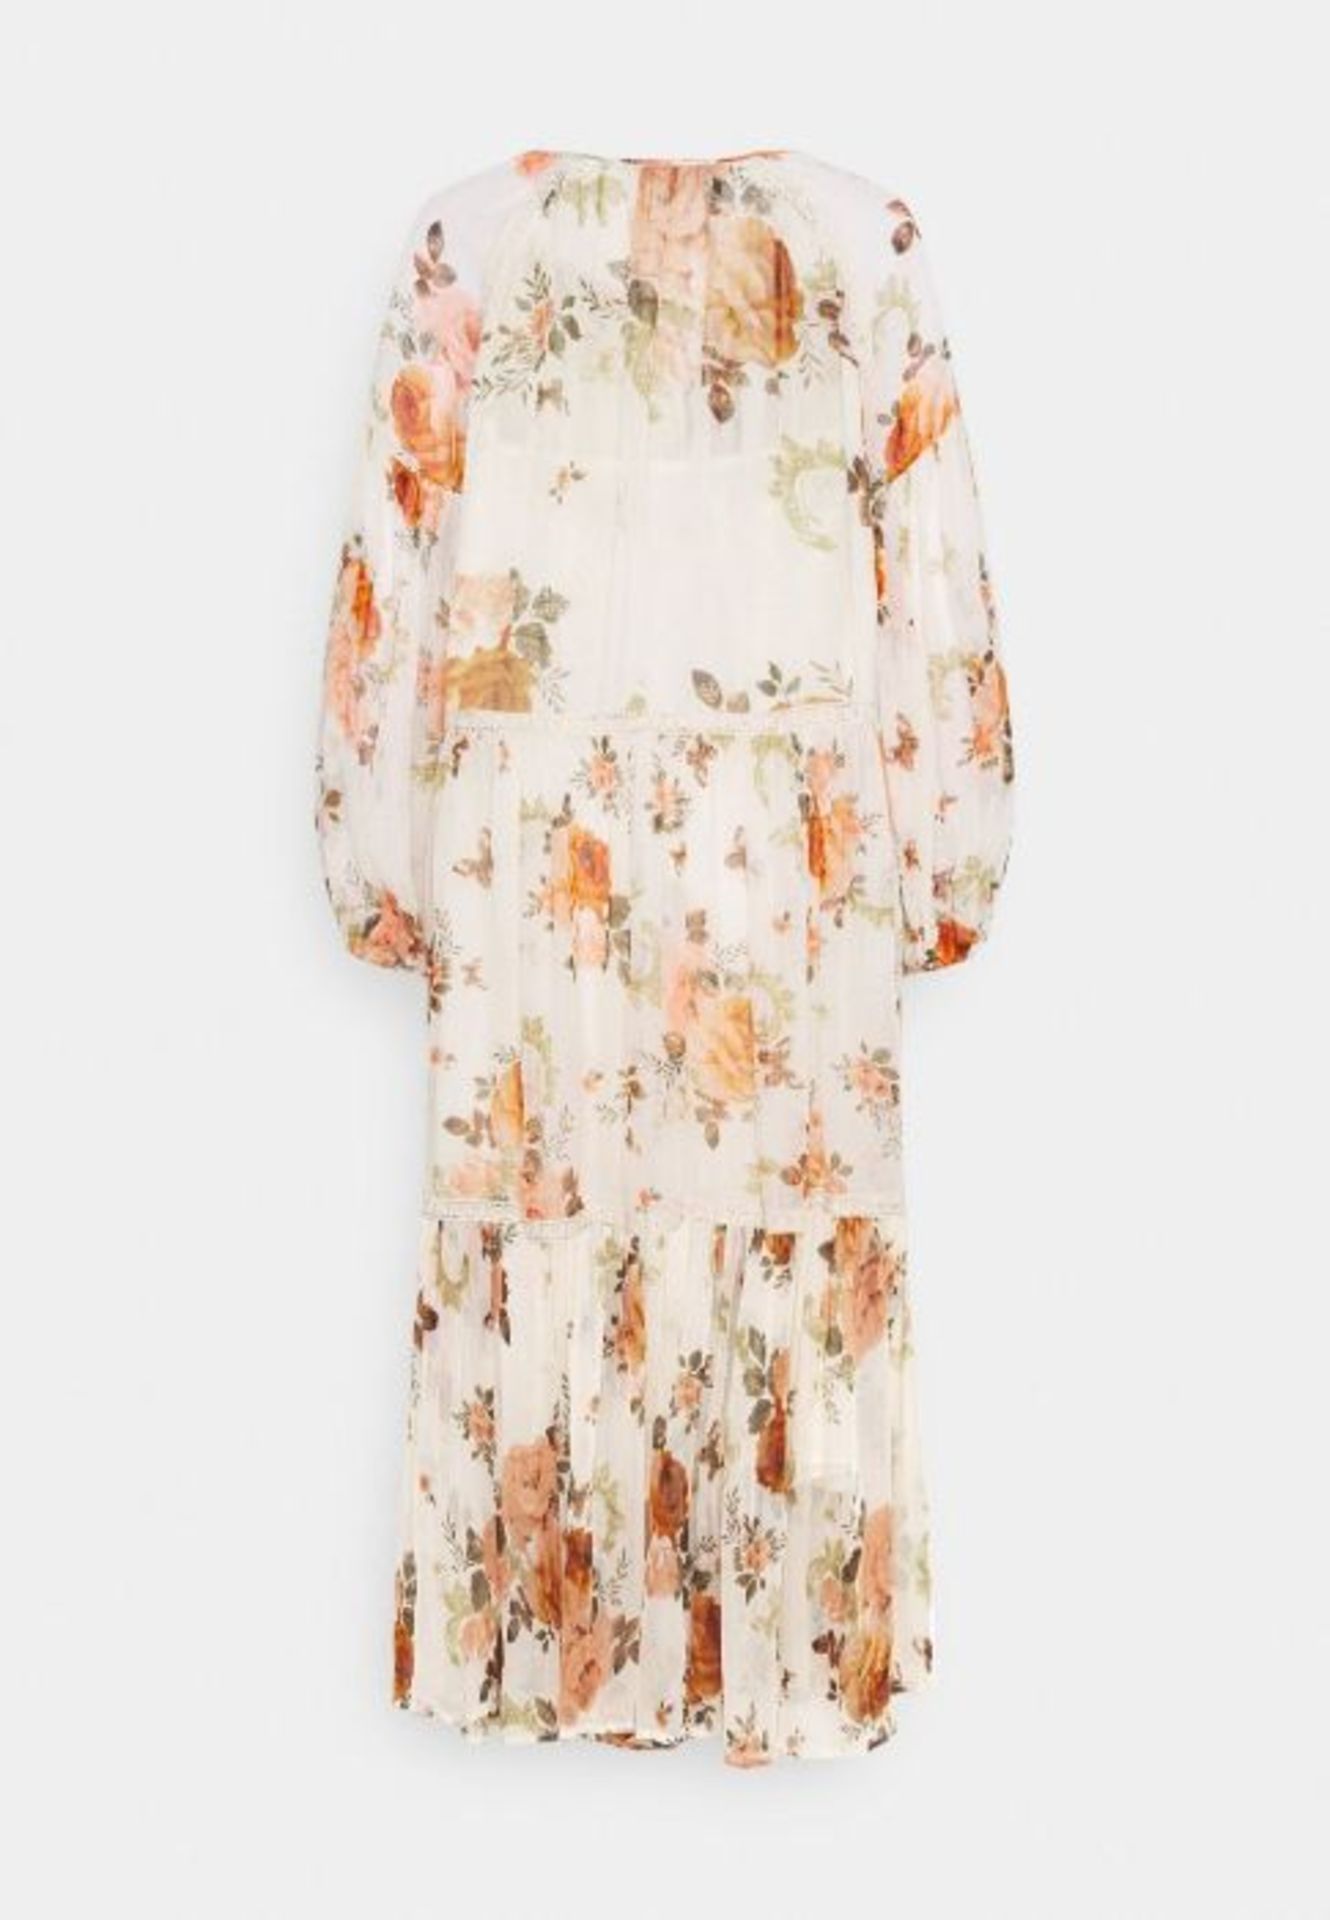 DERHY SANTANDER DRESS - OFF WHITE - SIZE: MEDIUM. GRADE B AS NEW WITH ORIGINAL TAGS HOWEVER ONE - Image 2 of 2